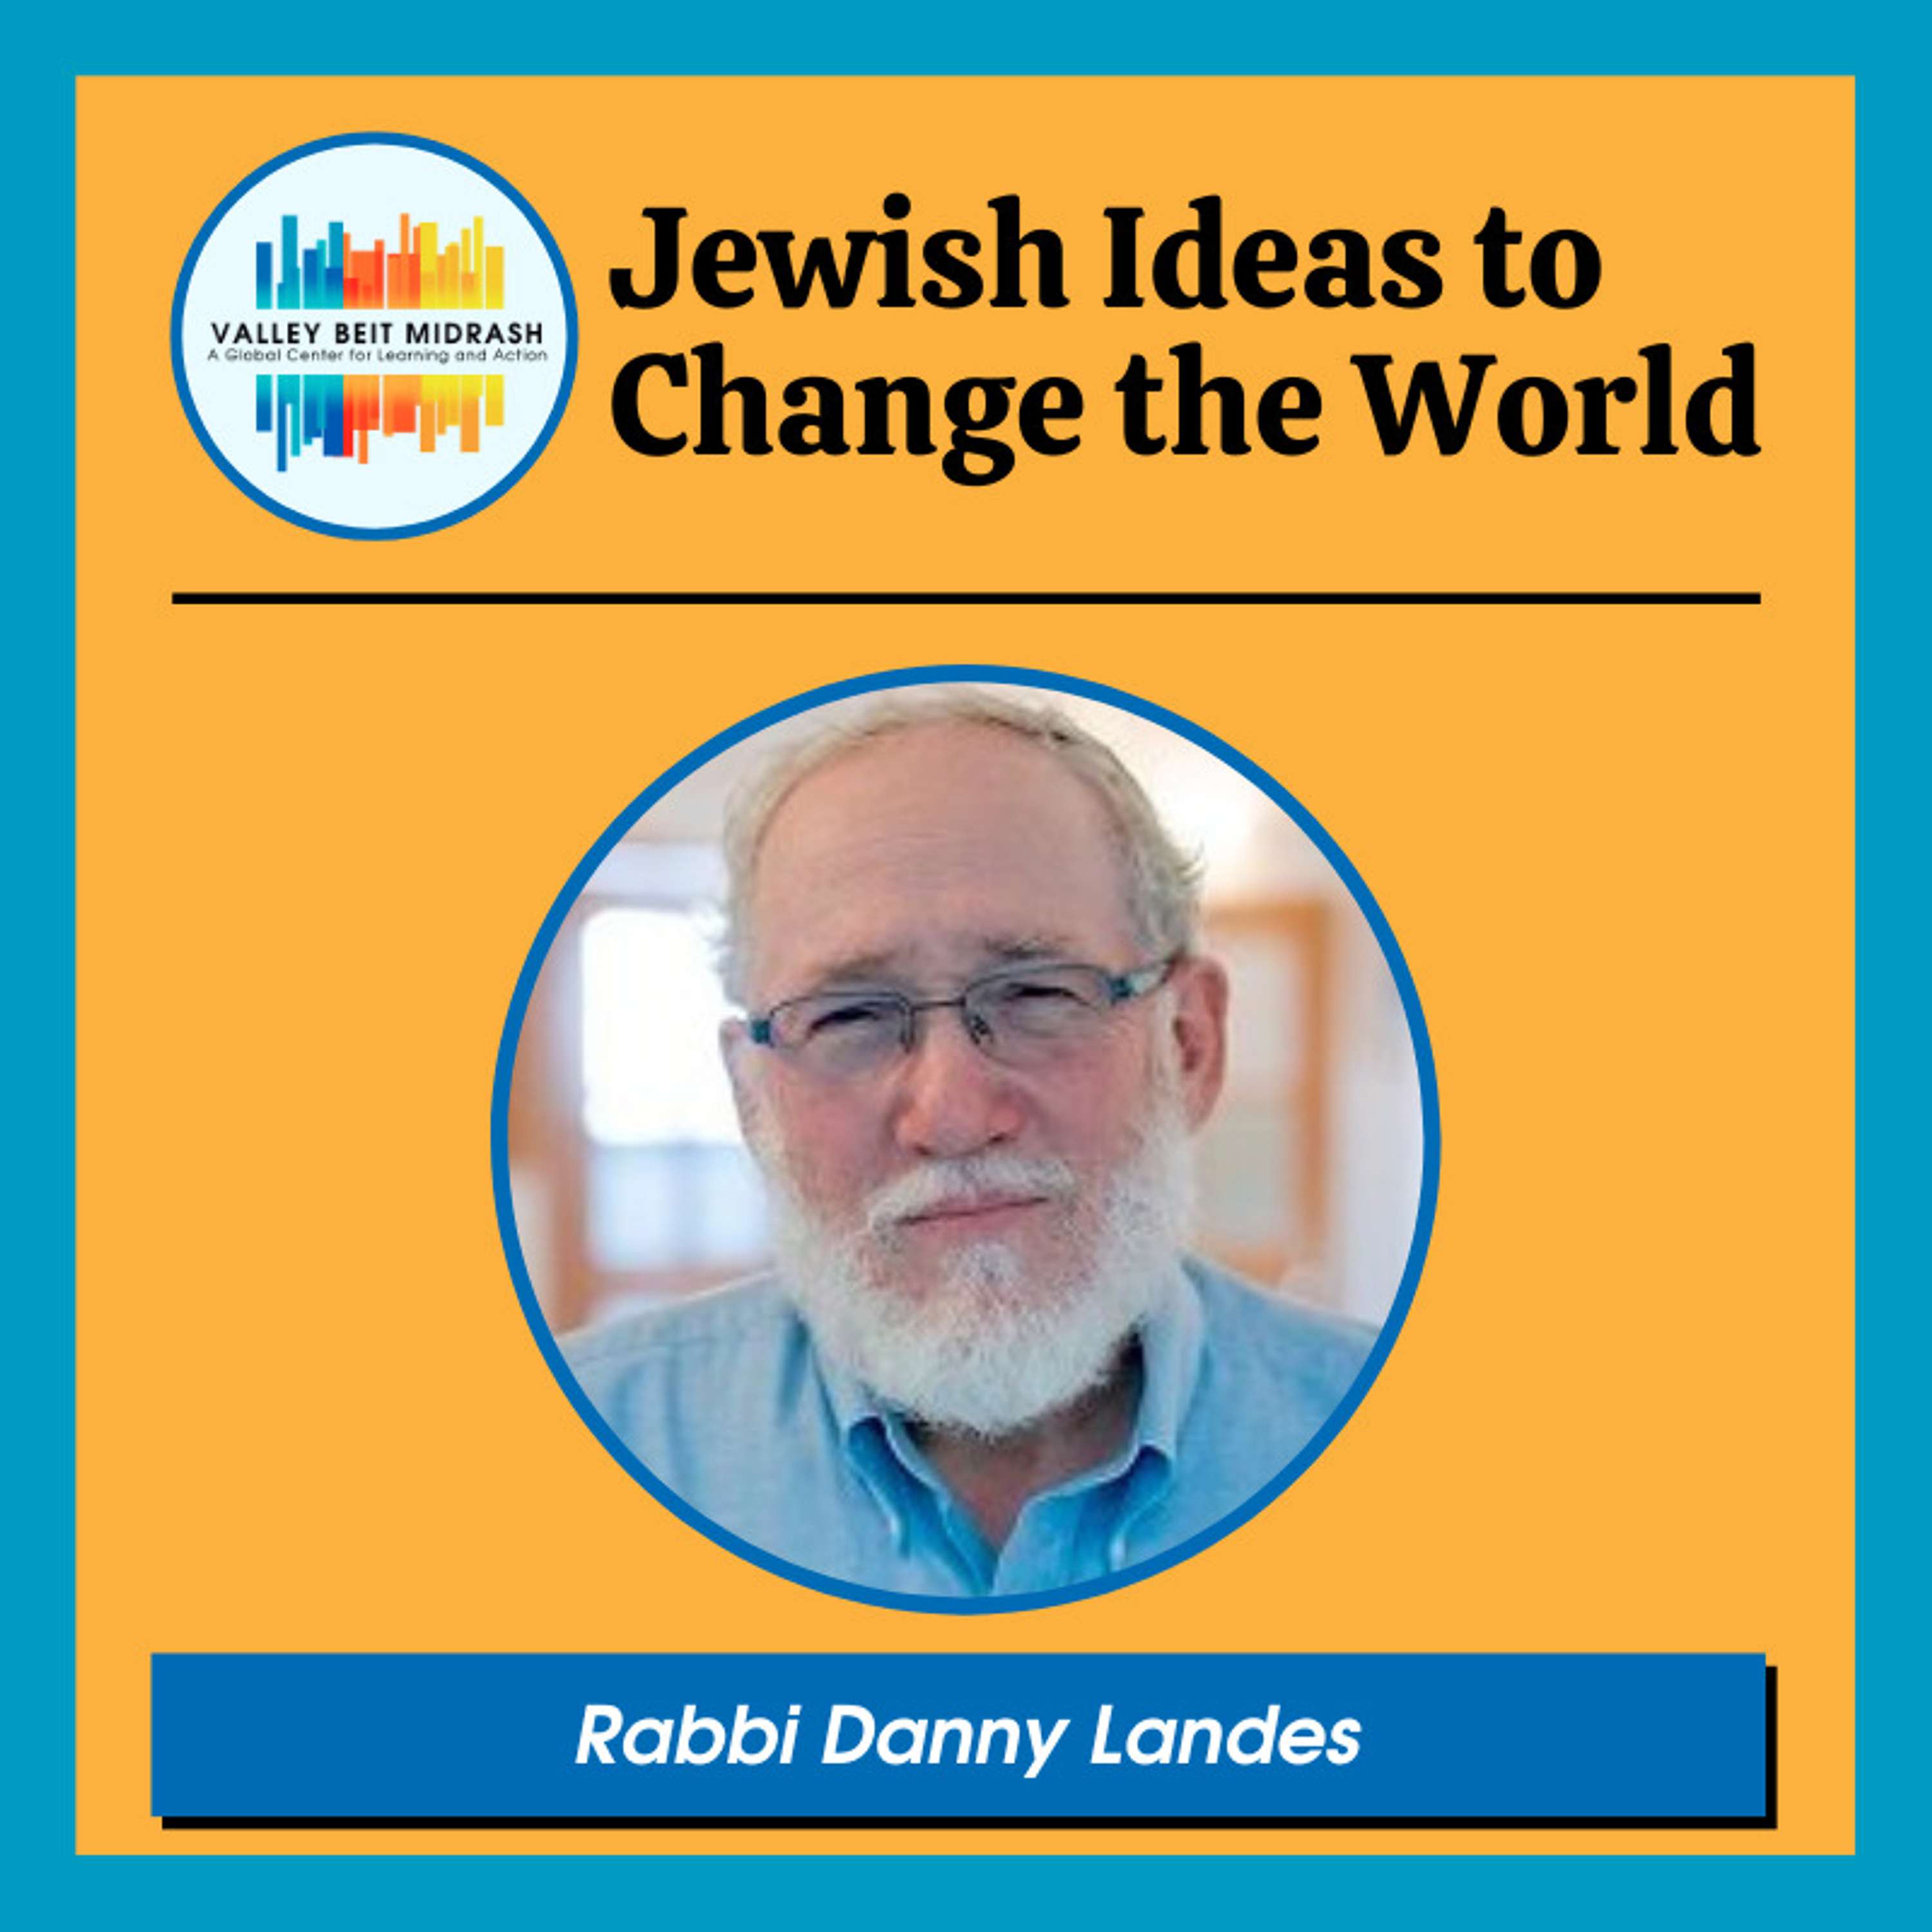 Responding to Extremism in the New Israeli Government Coalition: Interview With Rabbi Danny Landes